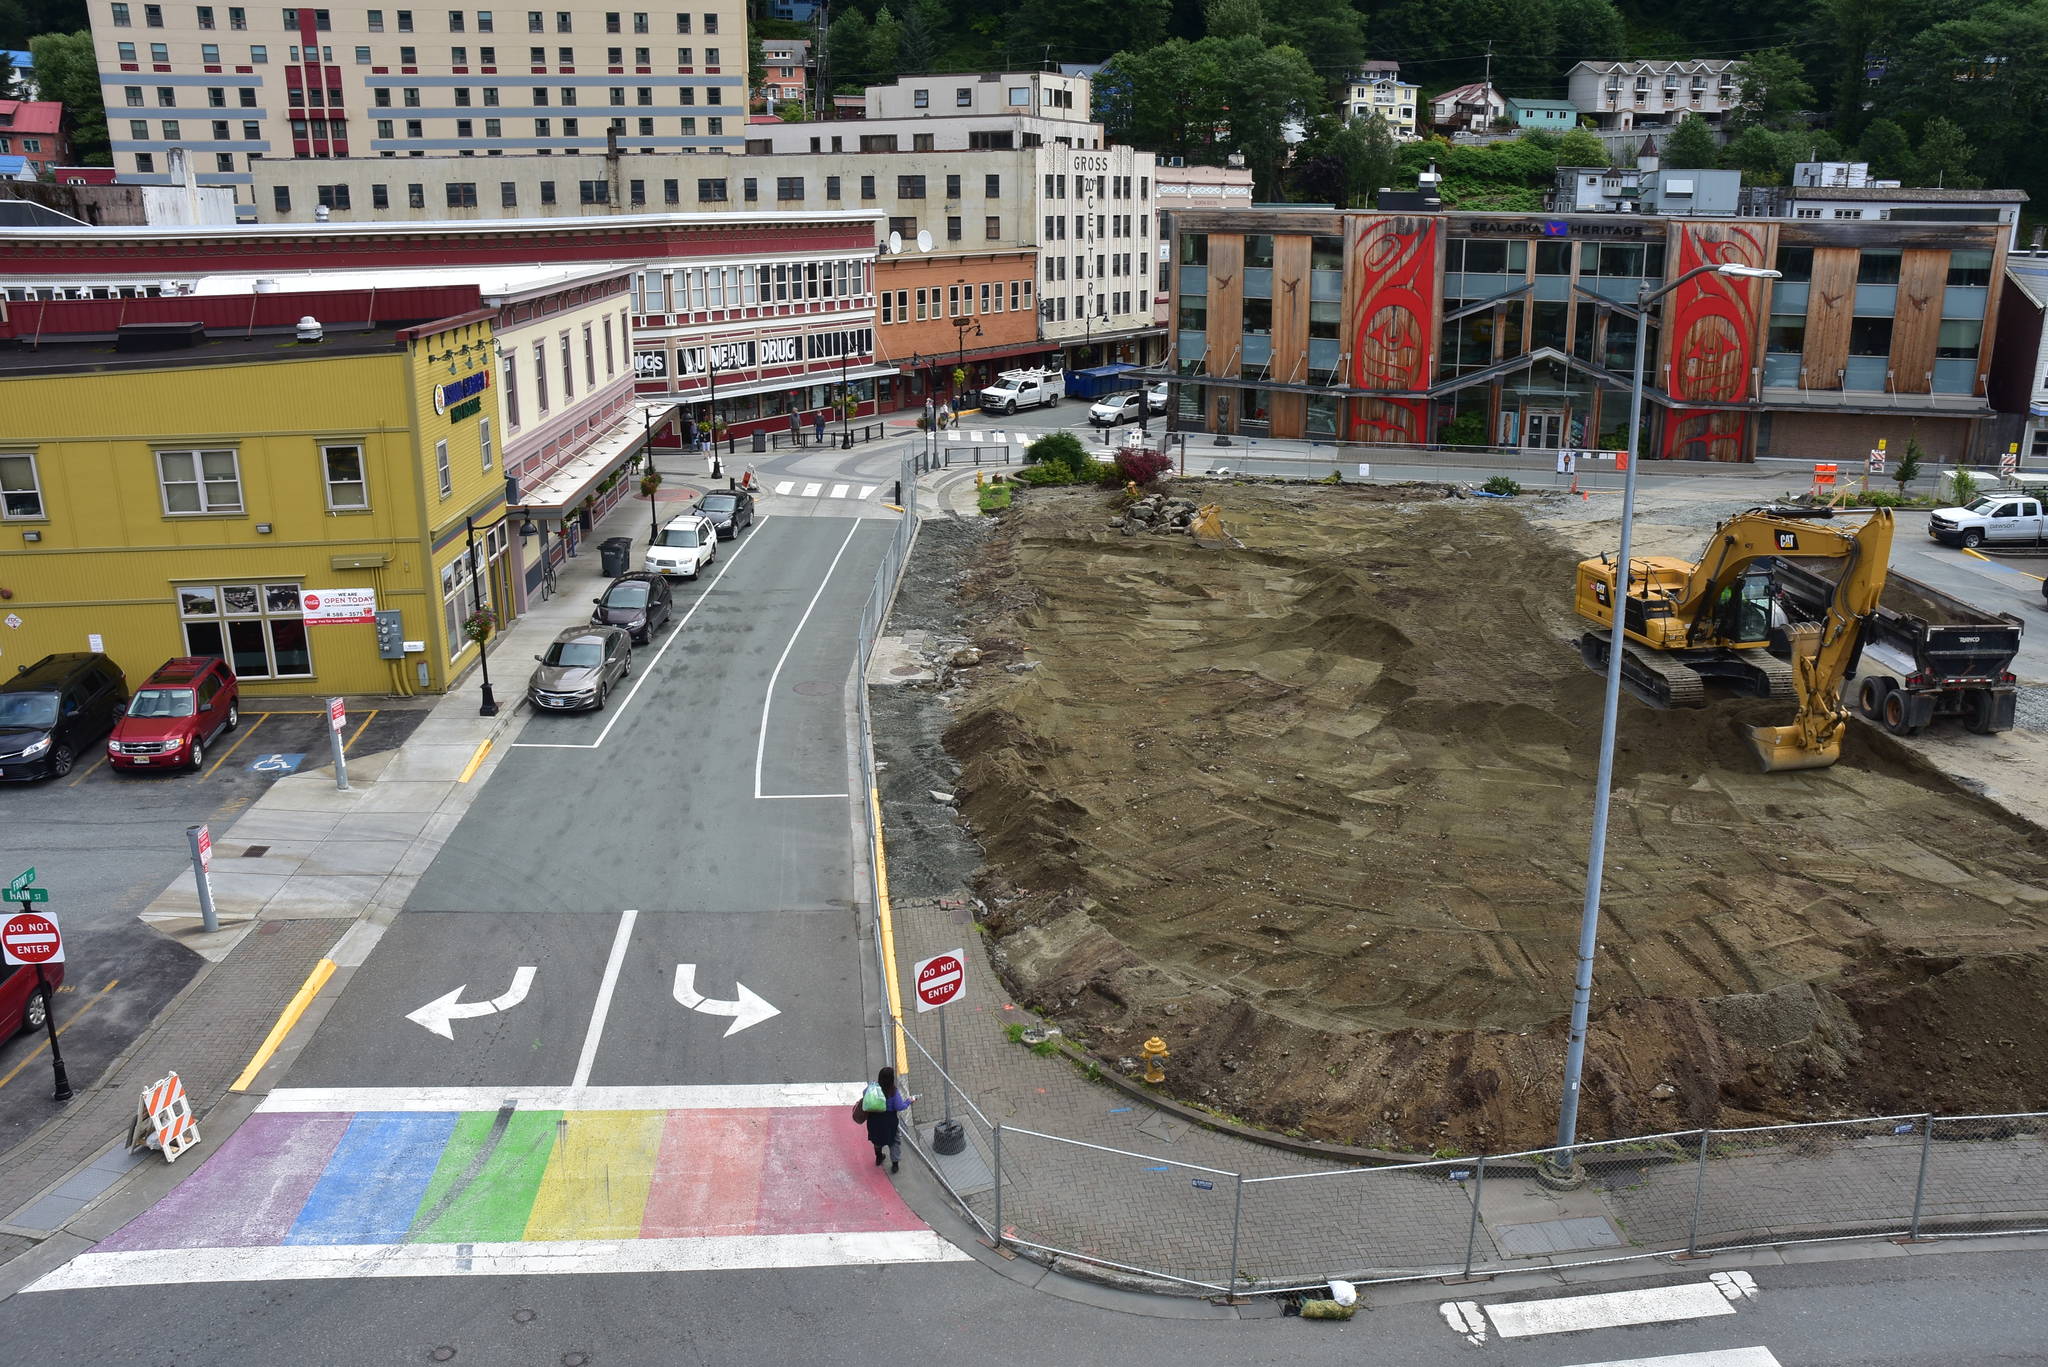 Peter Segall / Juneau Empire                                Juneau’s rainbow crosswalk, a project funded by fundraising, is just over a year old now on Aug. 20, 2020.